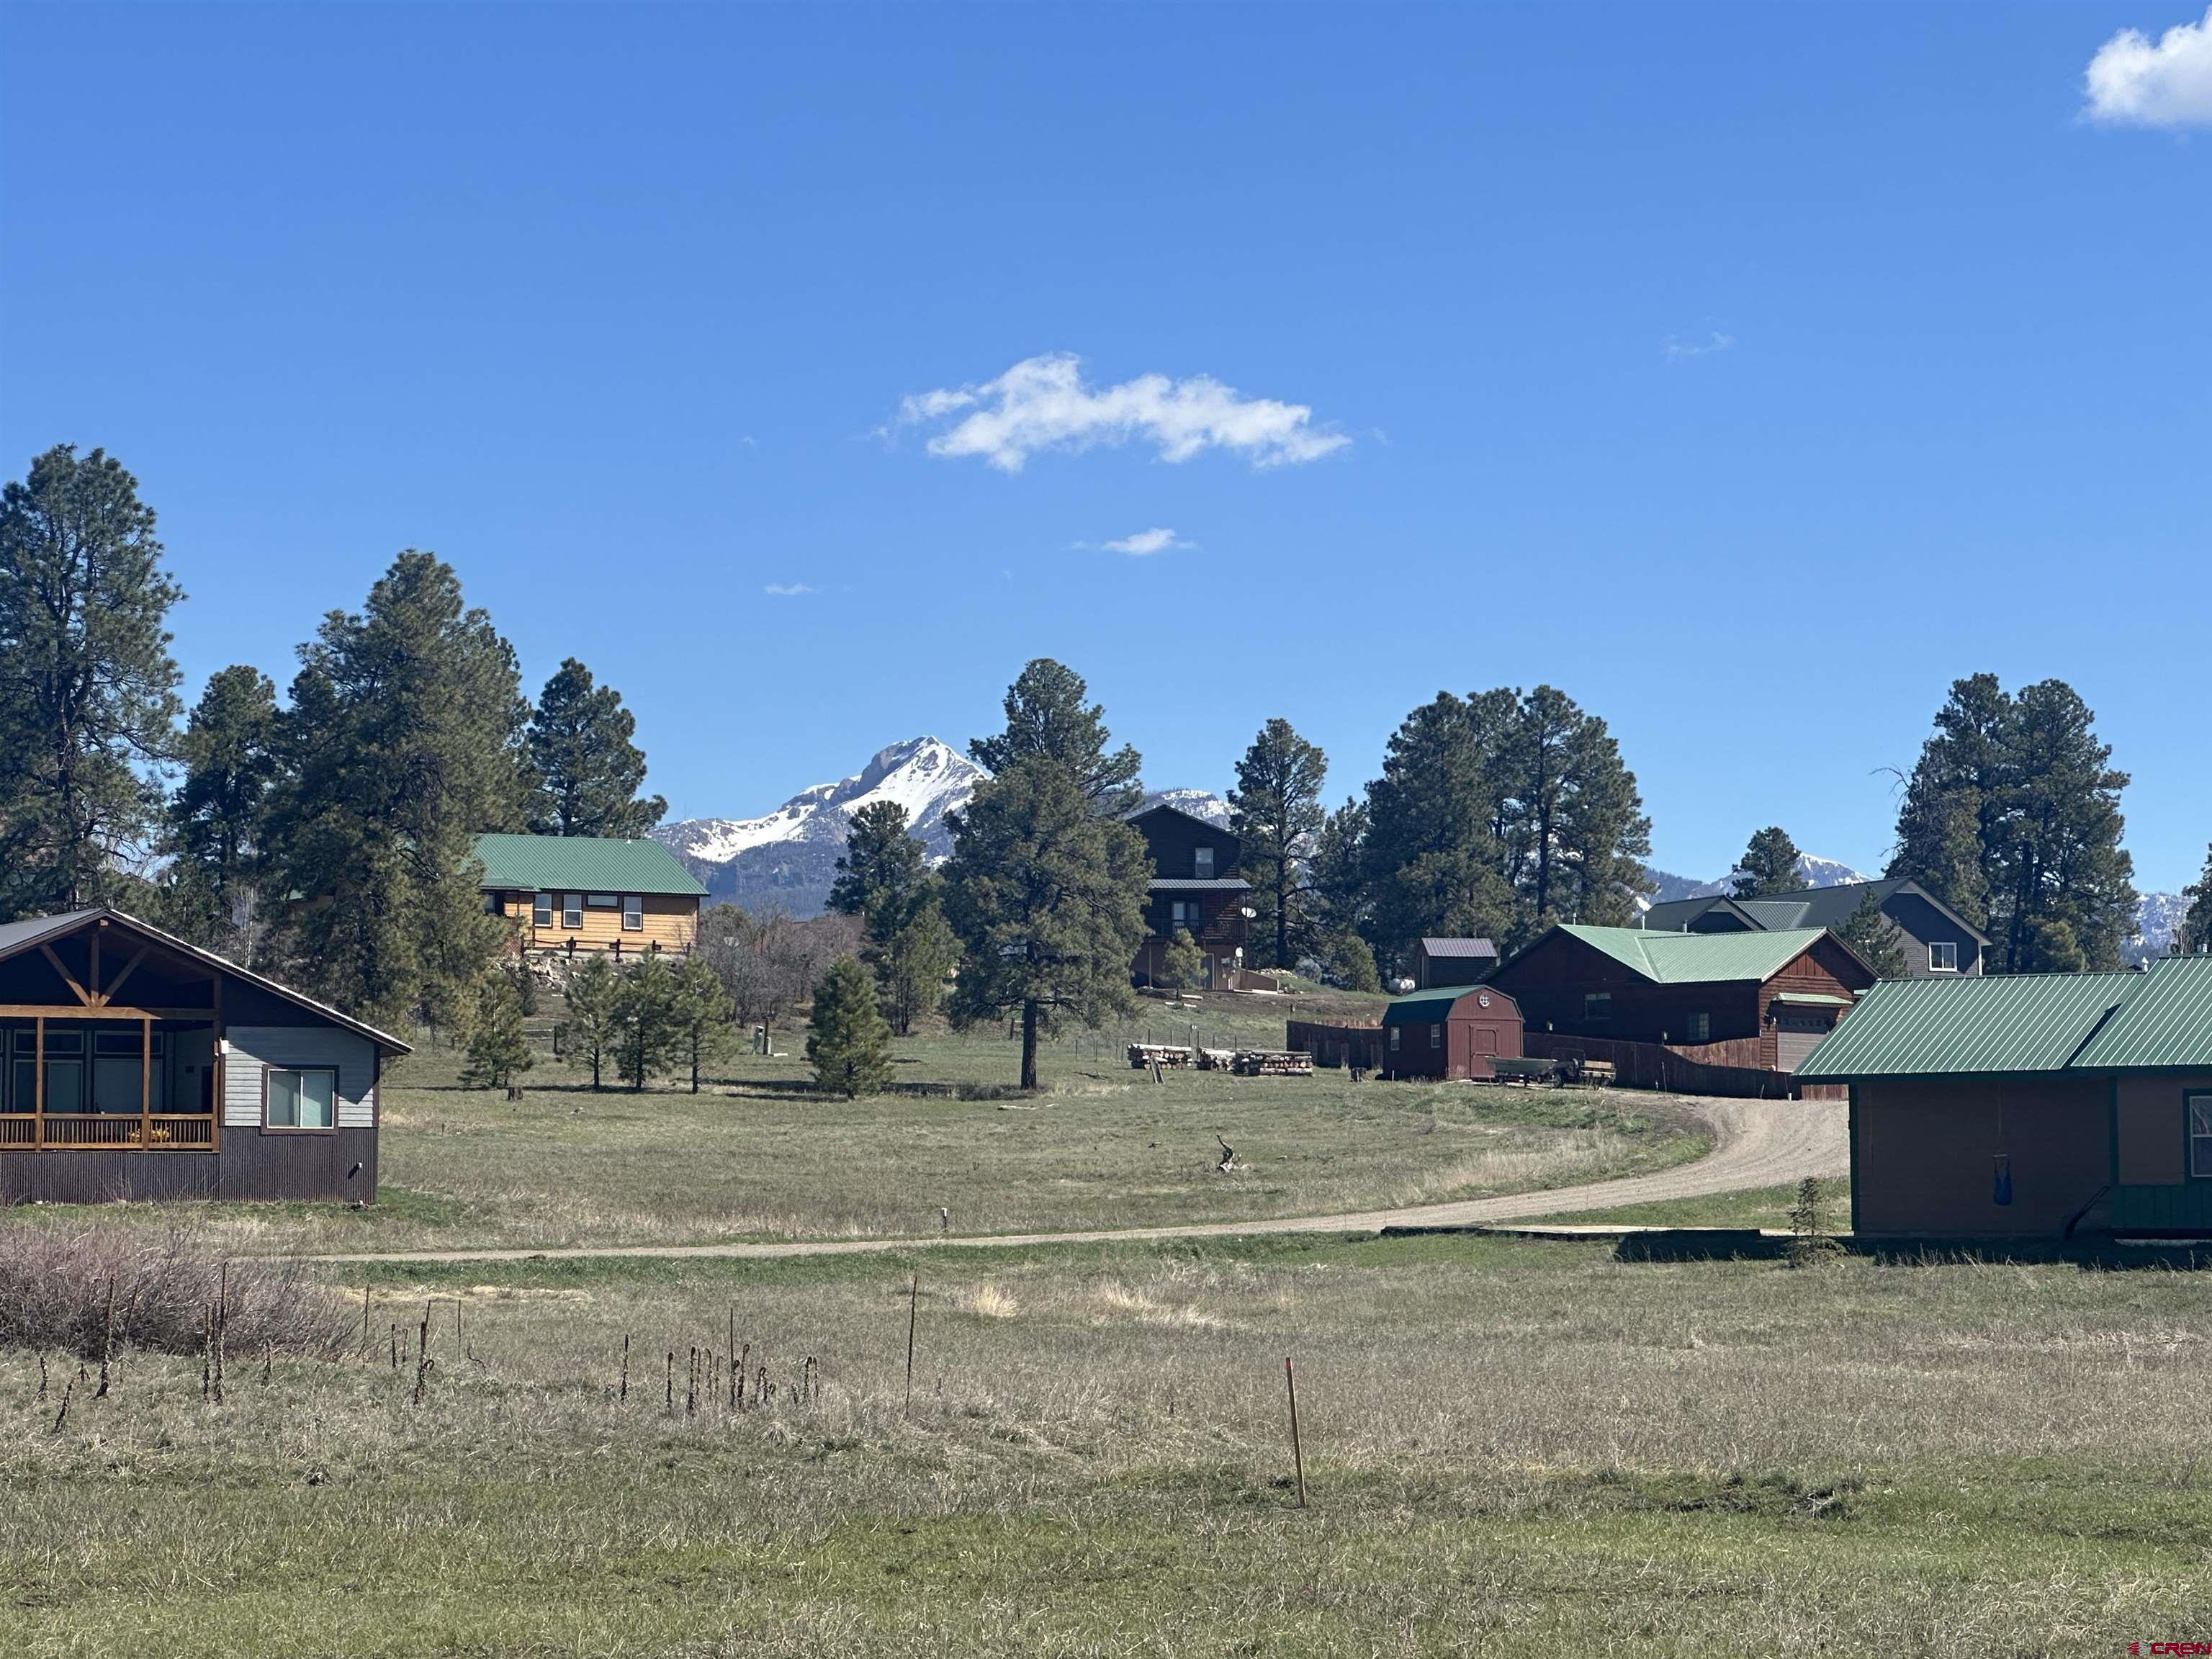 Photo of 79 Hills Cir in Pagosa Springs, CO